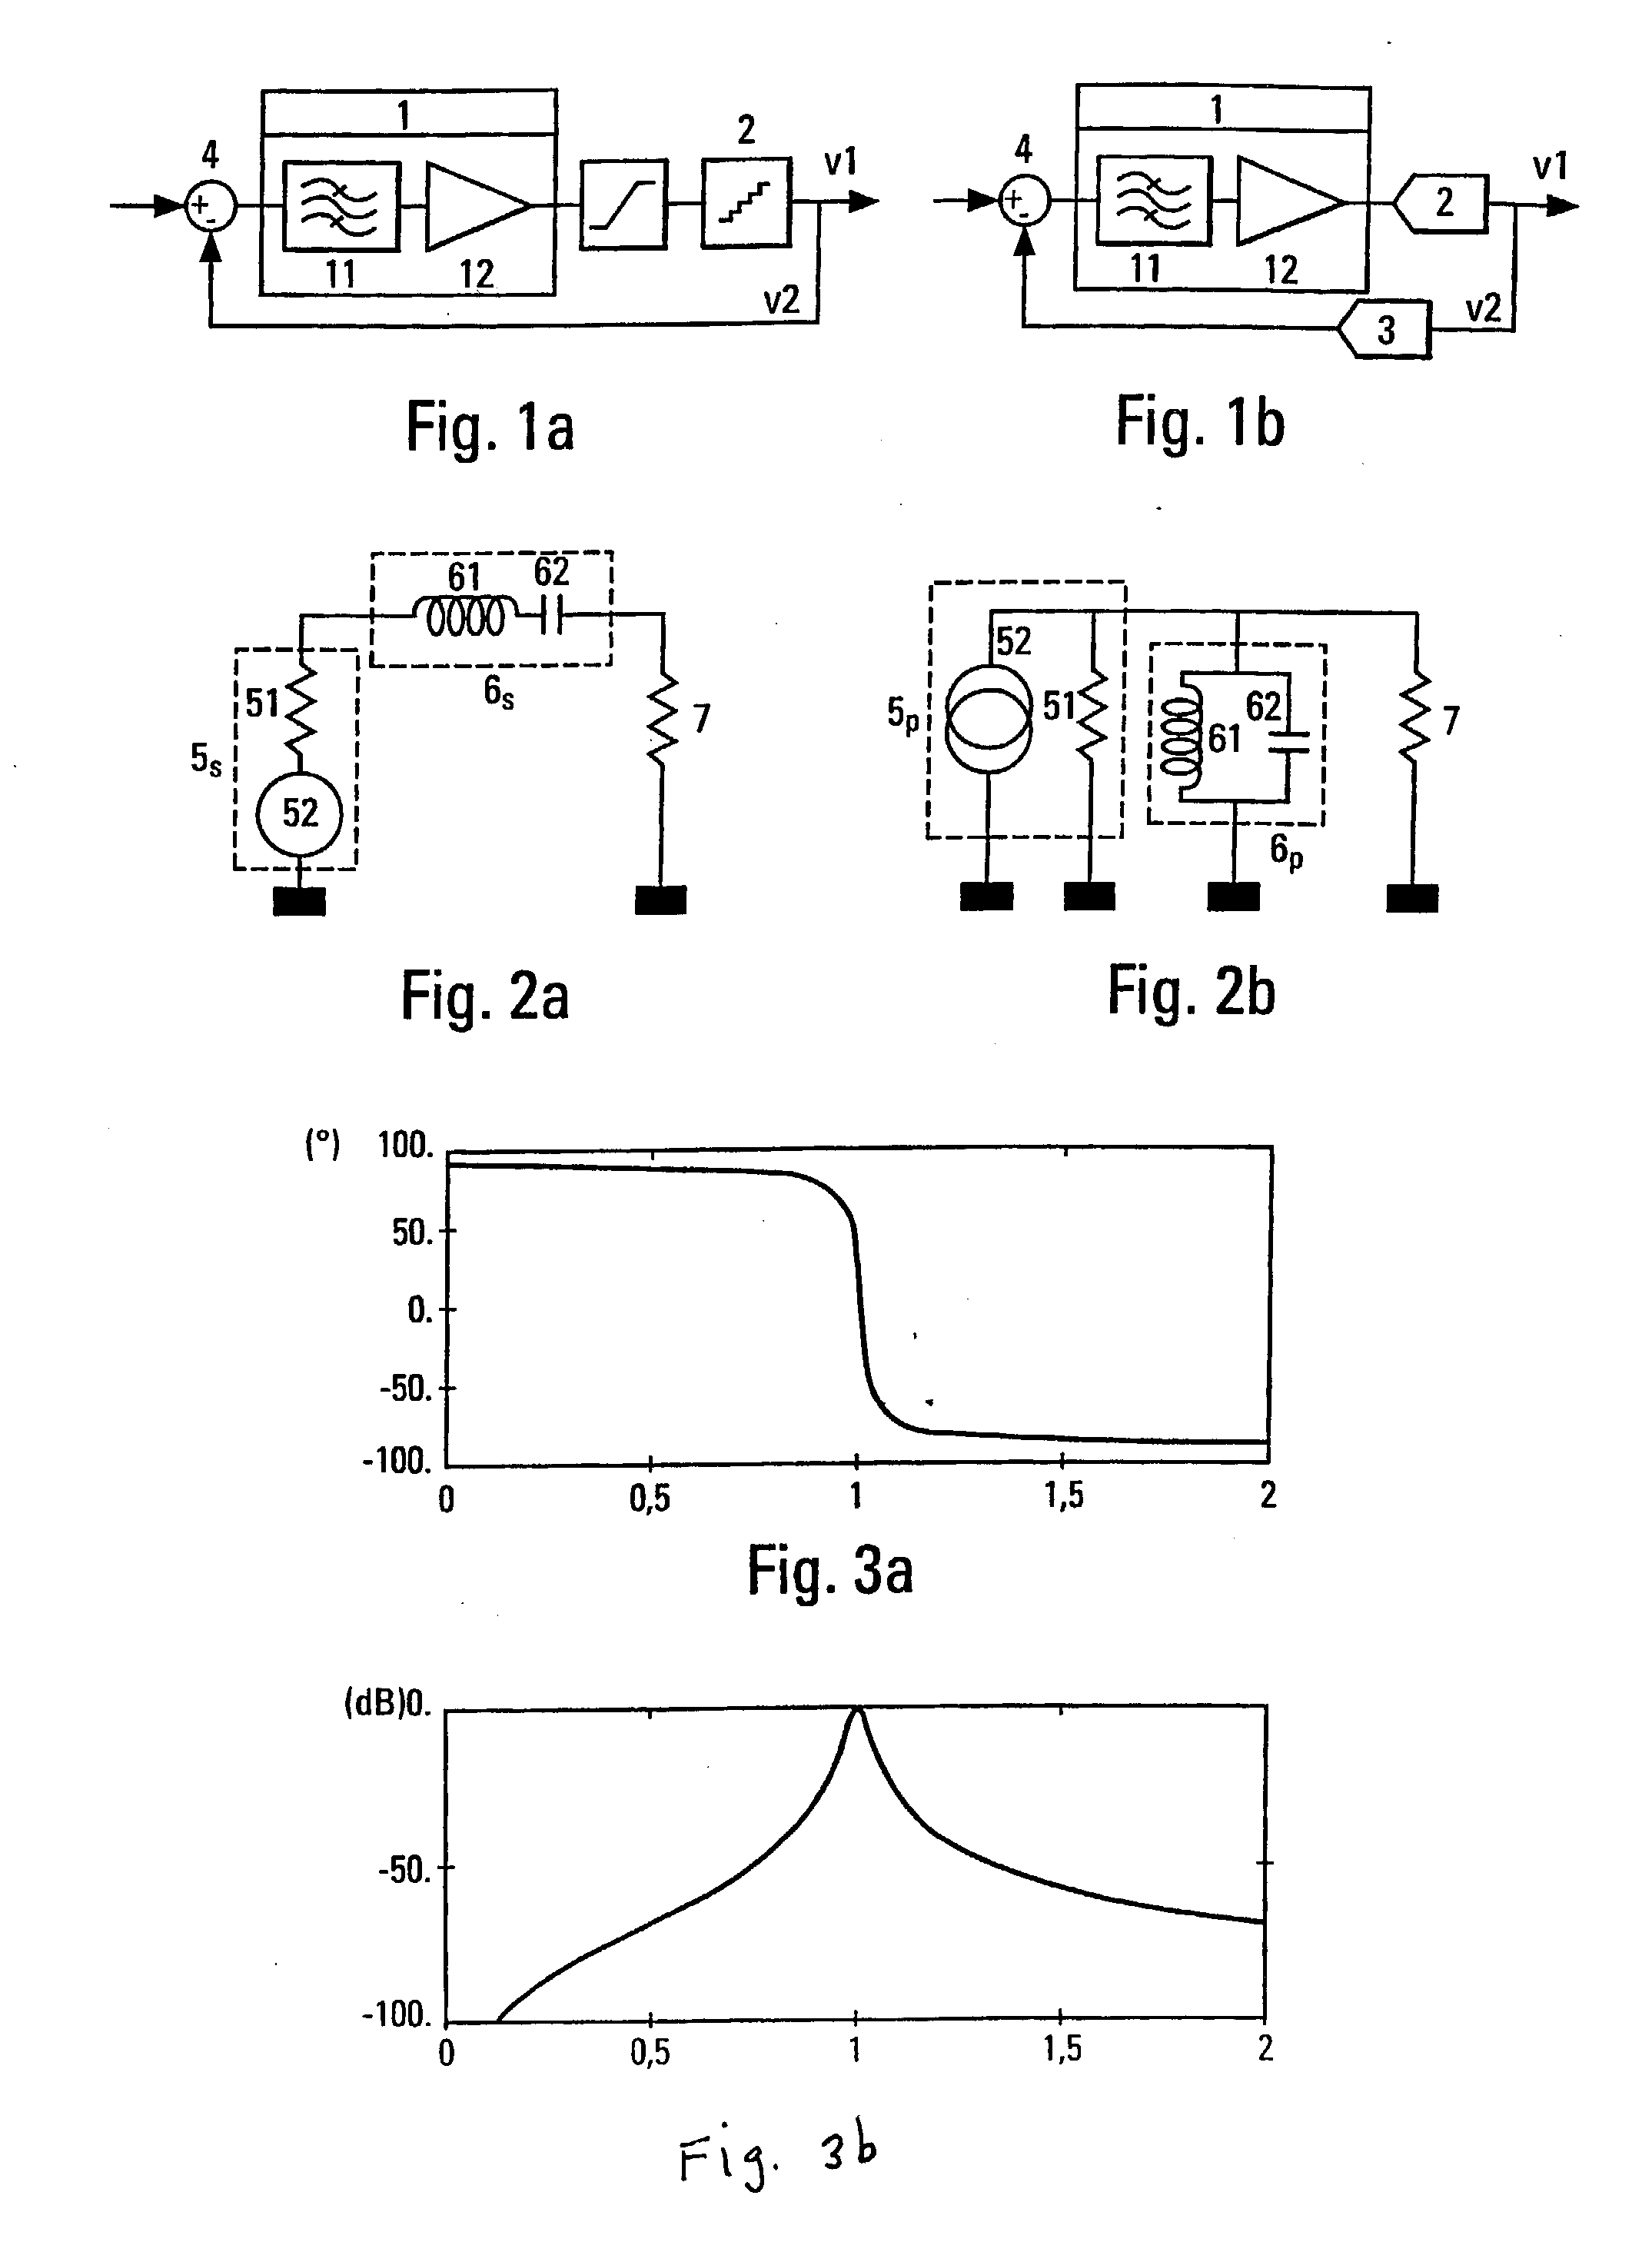 Continuous-time integrating filter with minimum phase variation, and bandpass sigma delta modulator using such a filter